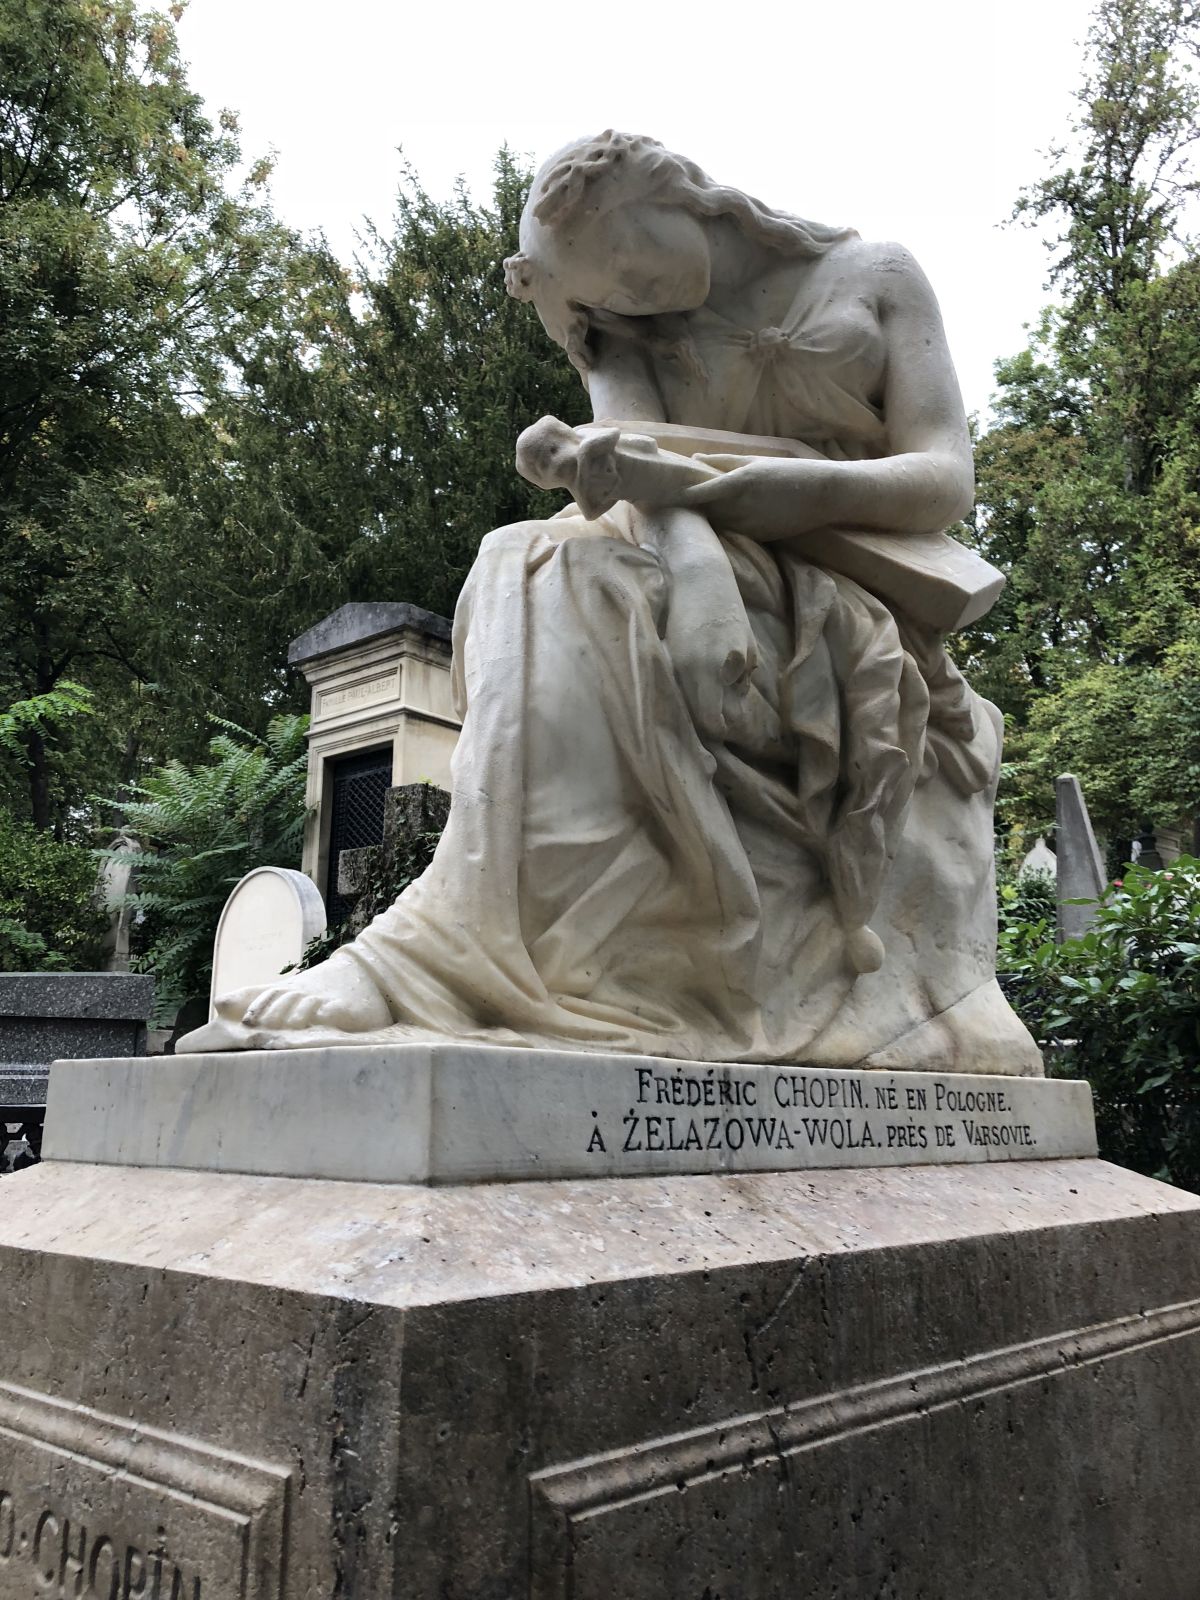 Tombstone of Frédéric Chopin in the Père-Lachaise cemetery in Paris